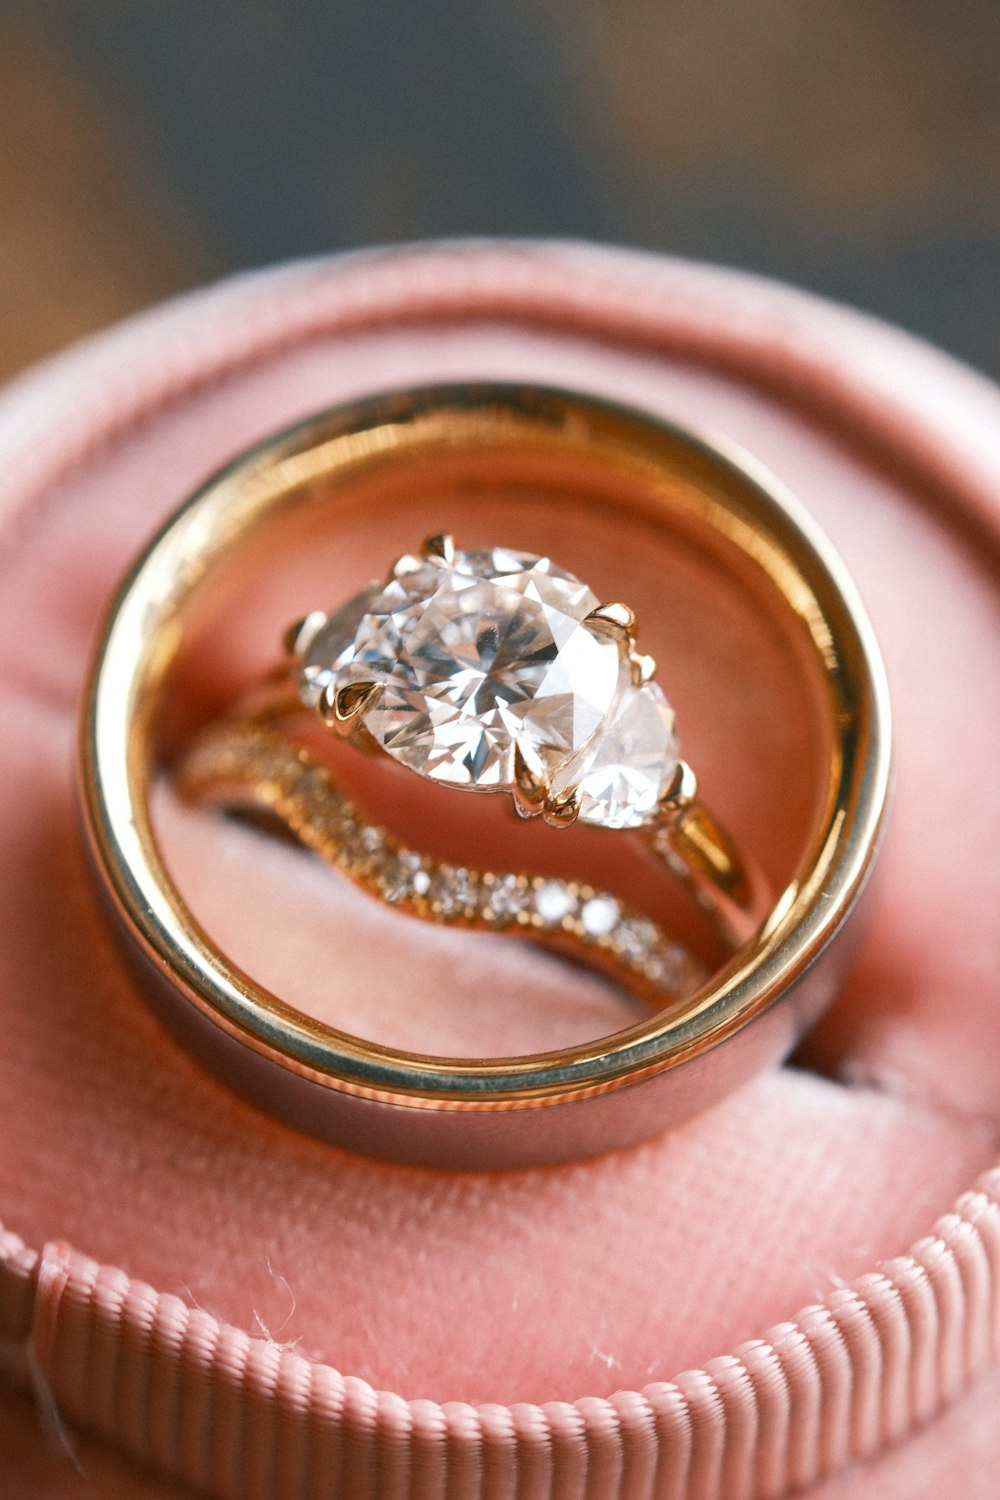 a ring on a person's finger